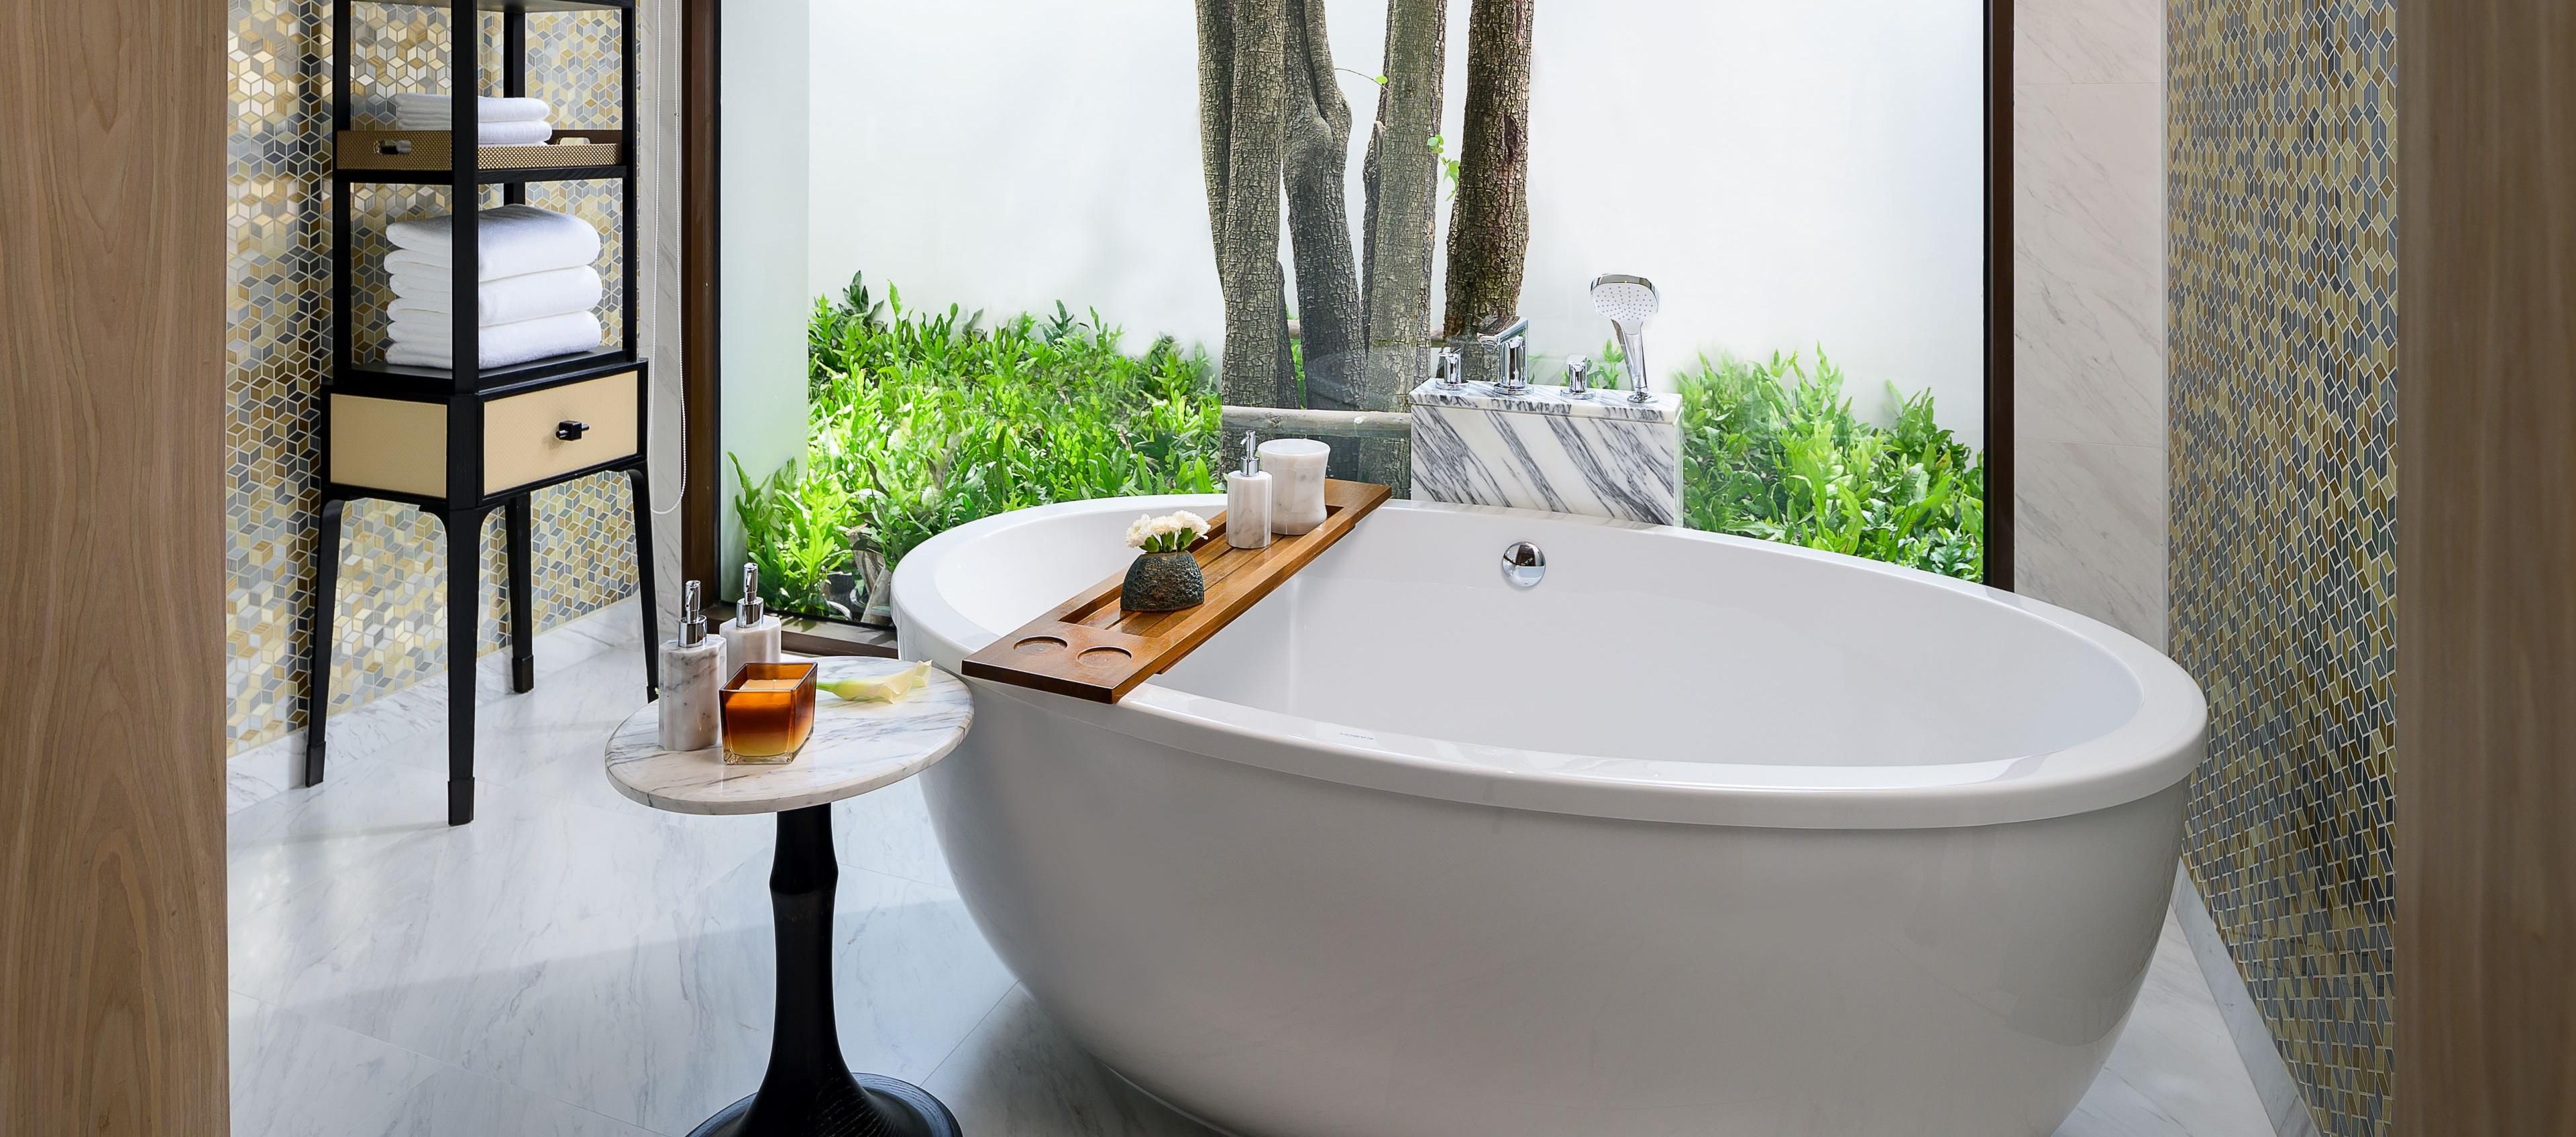 InterContinental Phuket  tub with outdoor view